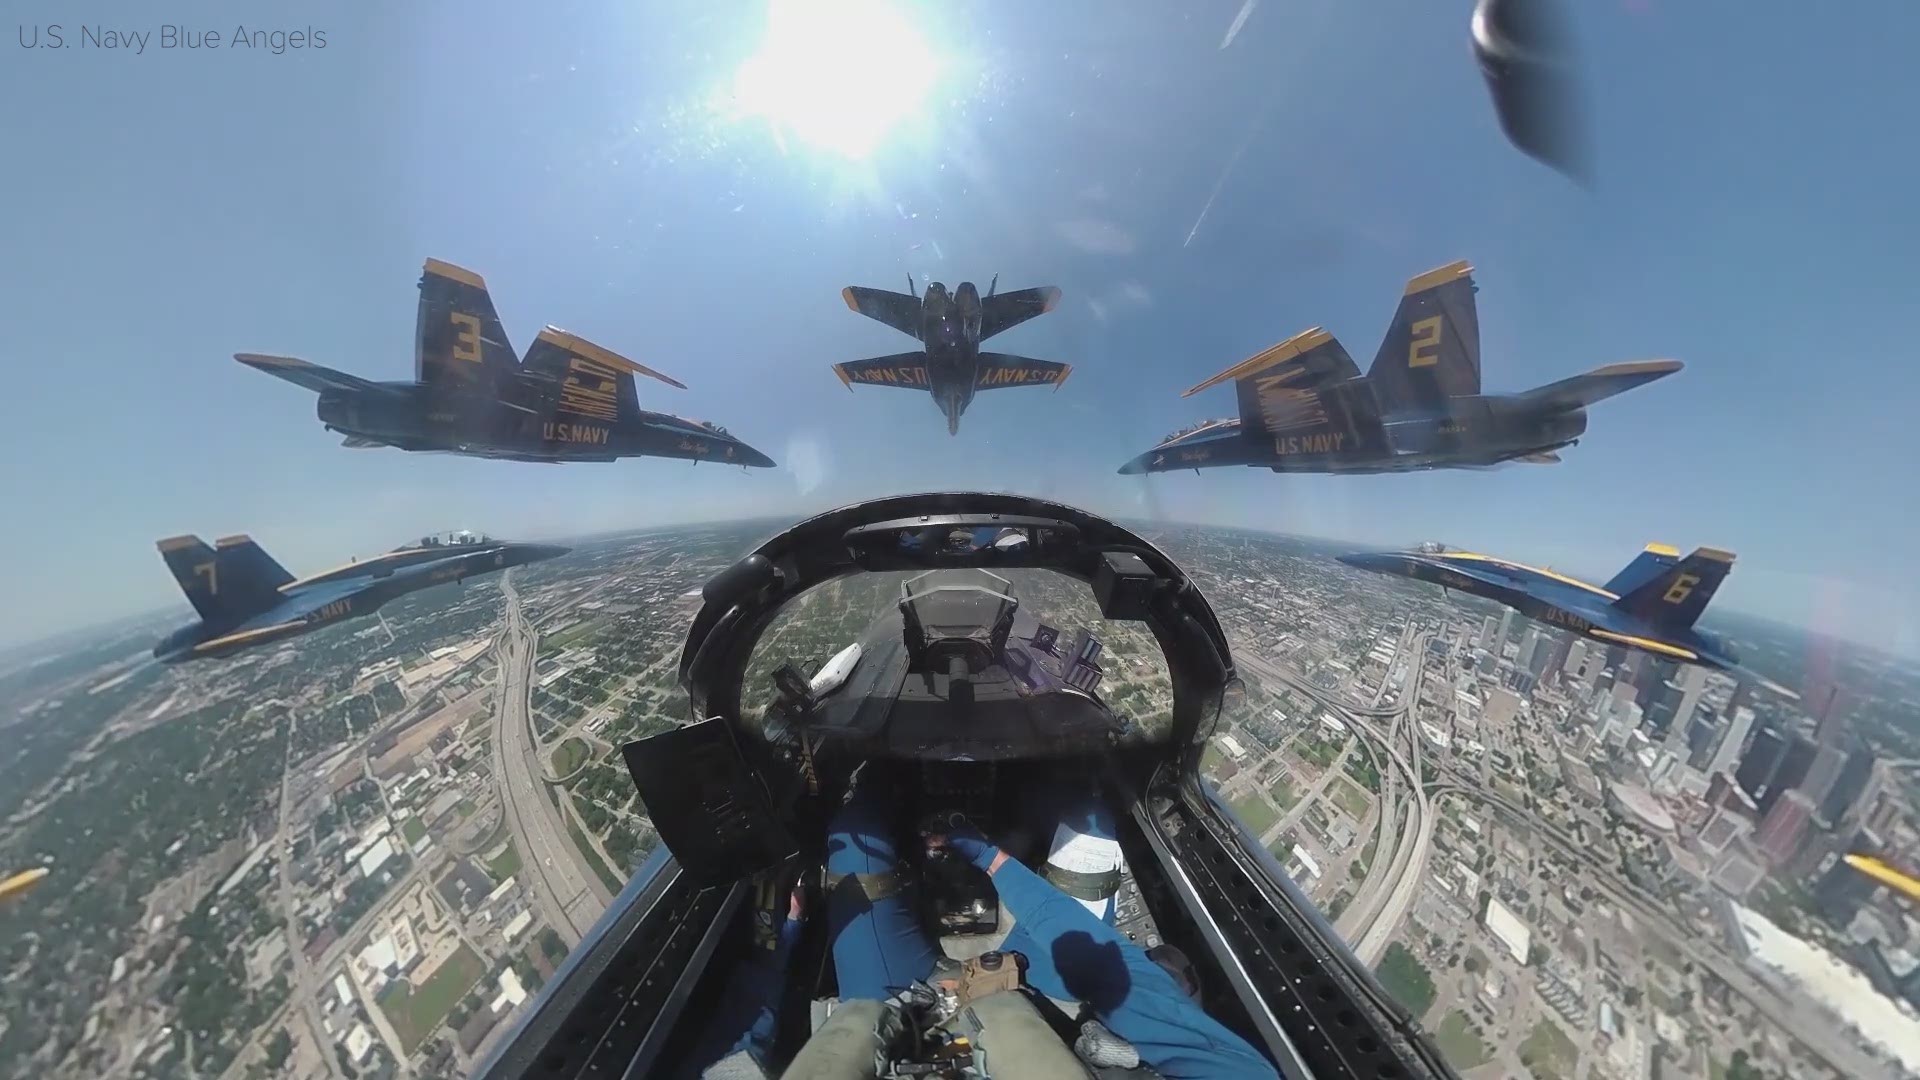 Operation America Strong: A cockpit view as the Blue Angels flew over Houston to honor frontline COVID-19 first responders and essential workers.